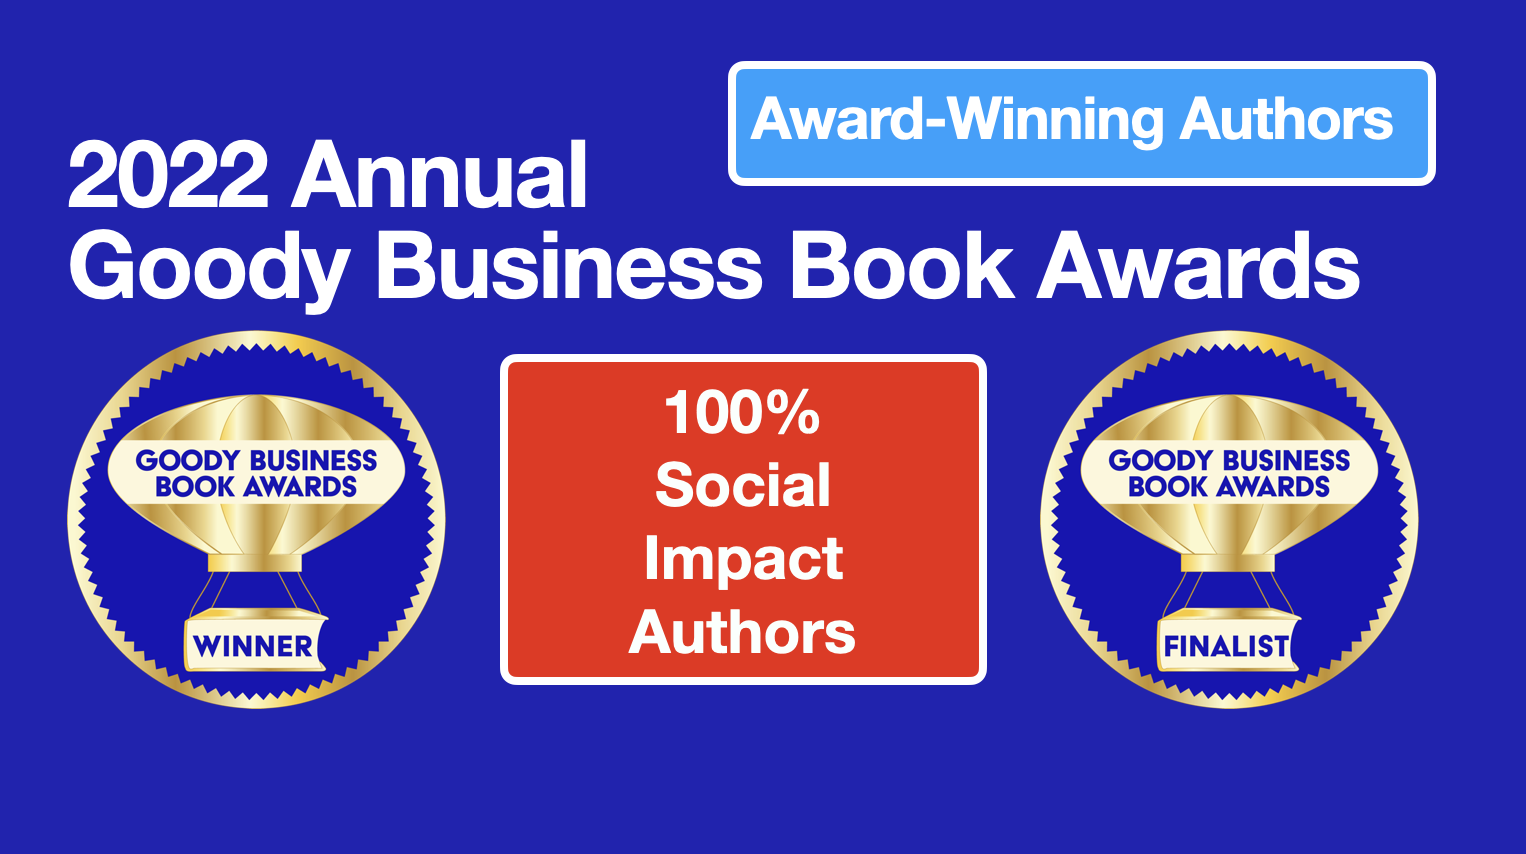 Goody Business Book Awards announce 2022 Winners and Finalists for 100% Social Impact Books to help shine a light on authors making a difference with words.